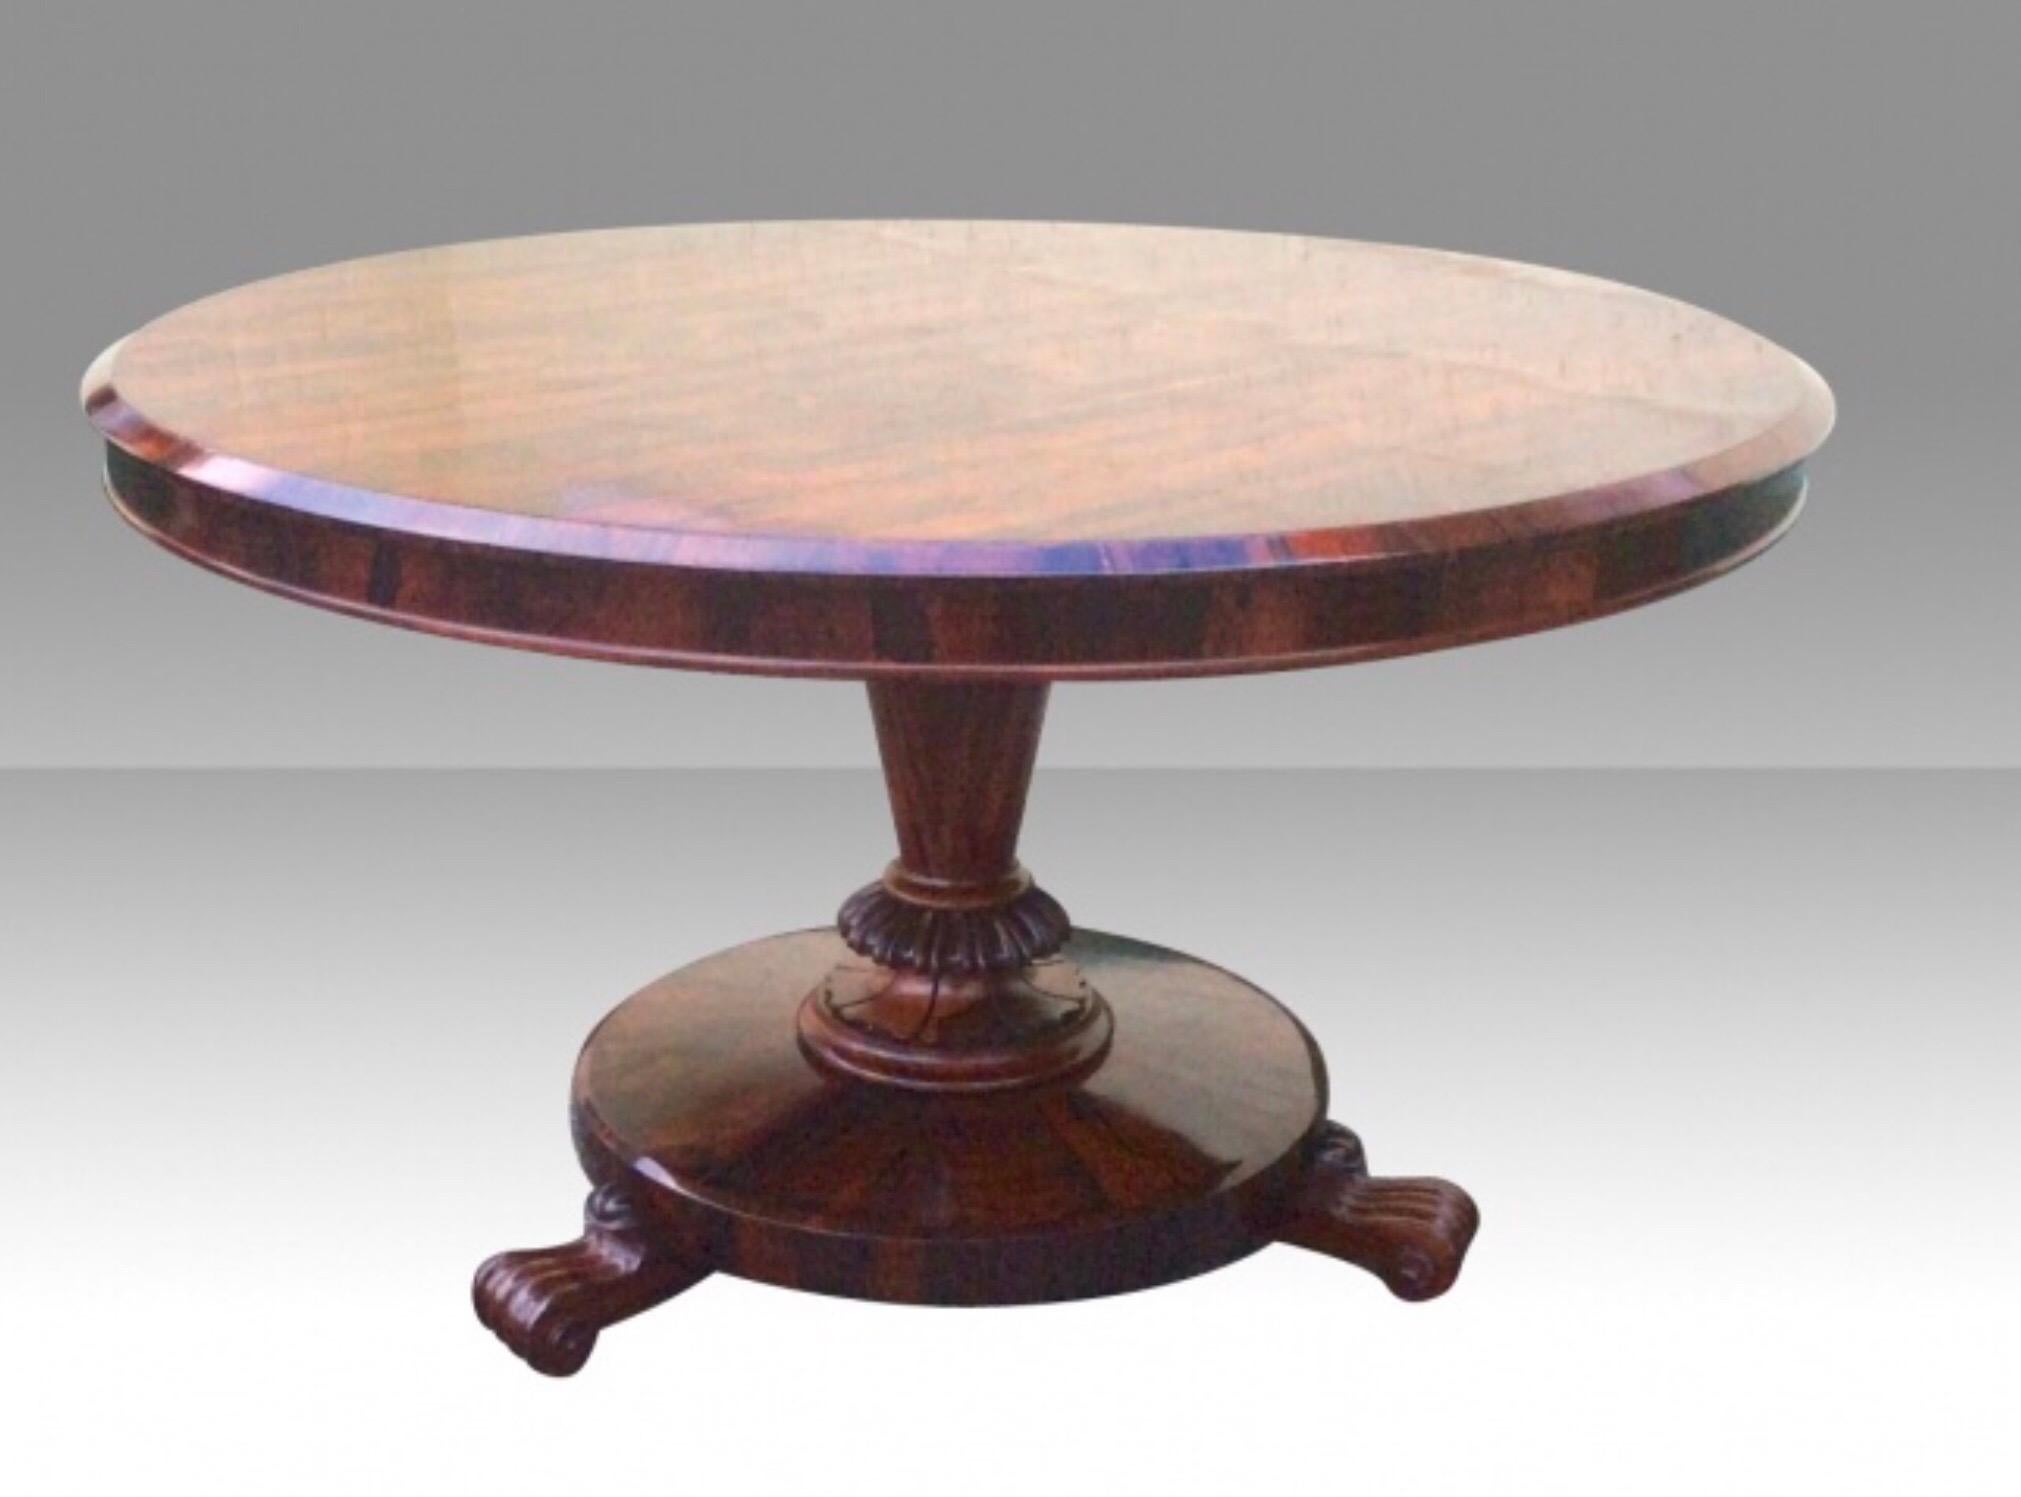 Antique Rosewood Tilt Top Circular Centre Table / Dining Table /Hall Table In Good Condition For Sale In Antrim, GB